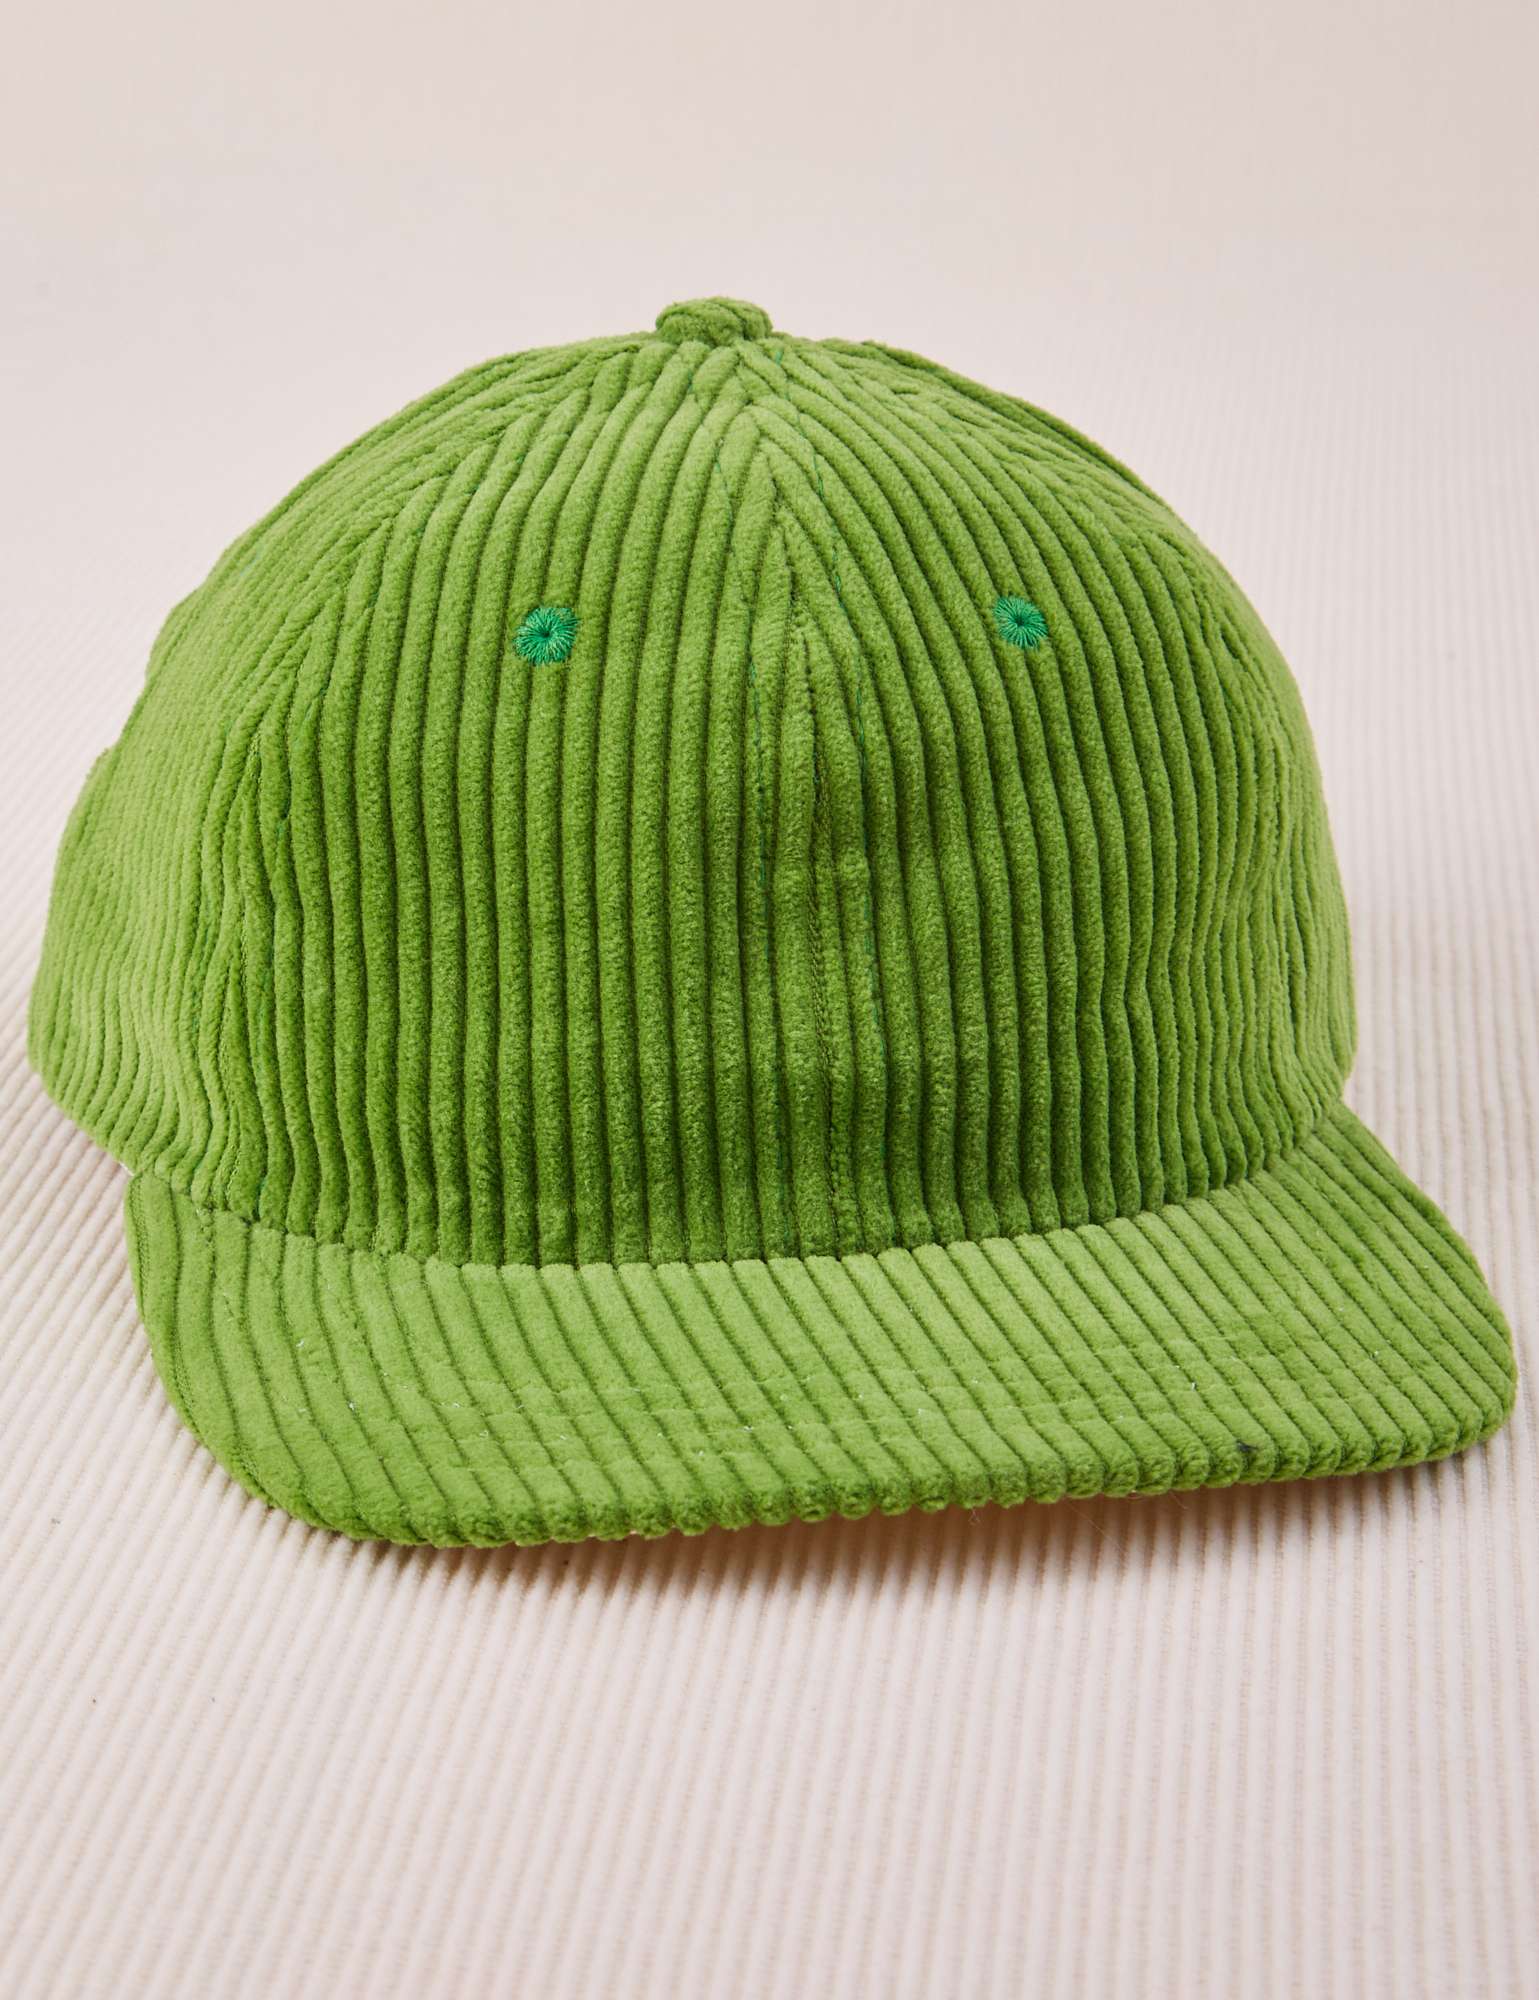 Dugout Corduroy Hat in Bright Olive